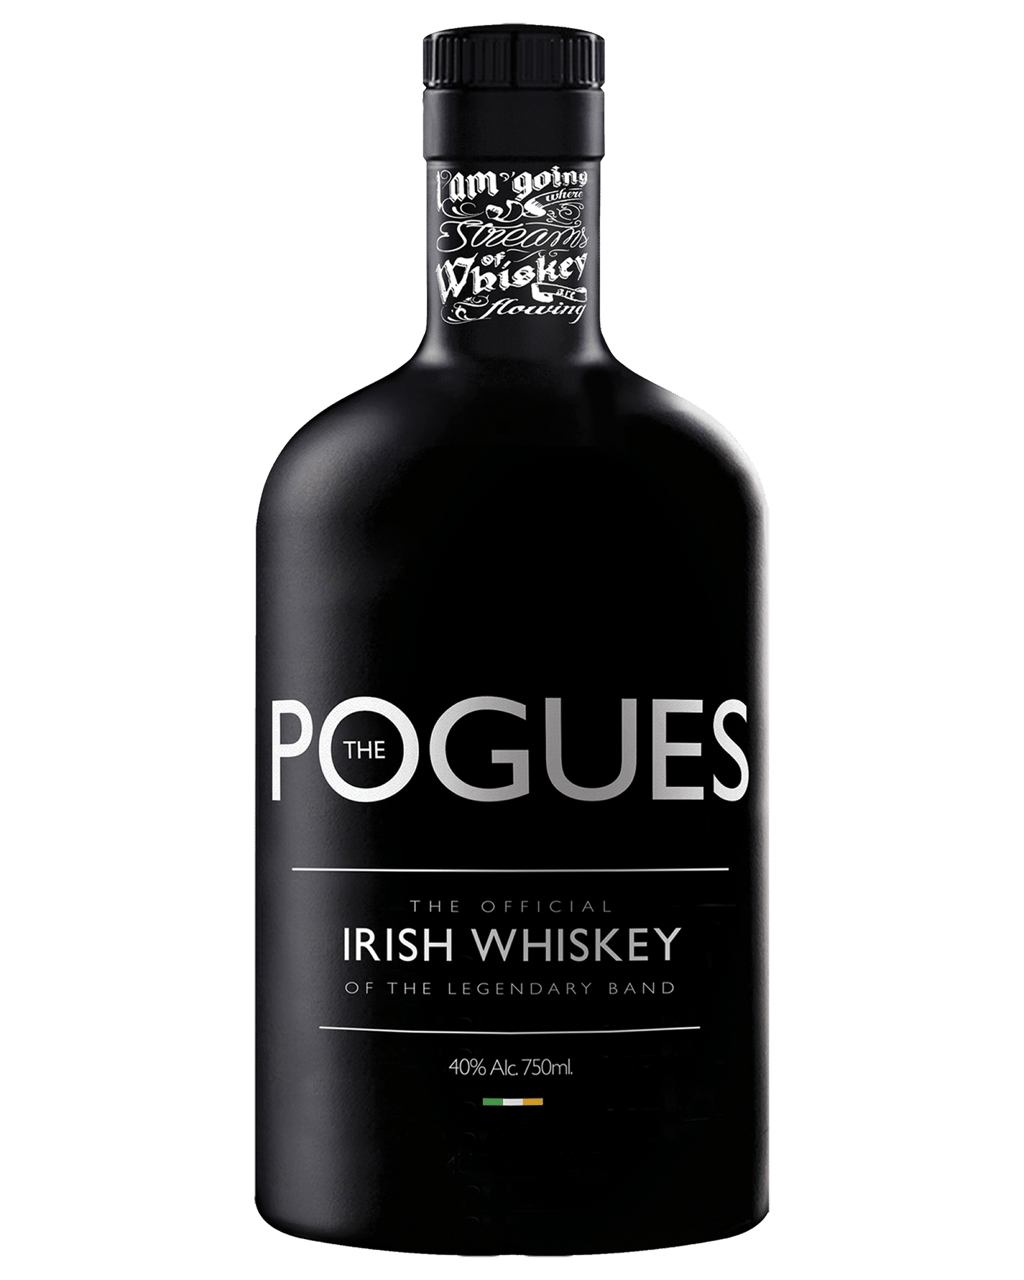 Buy The Pogues Irish Whiskey 750ml Online Lowest Price Guarantee Best Deals Same Day 6187